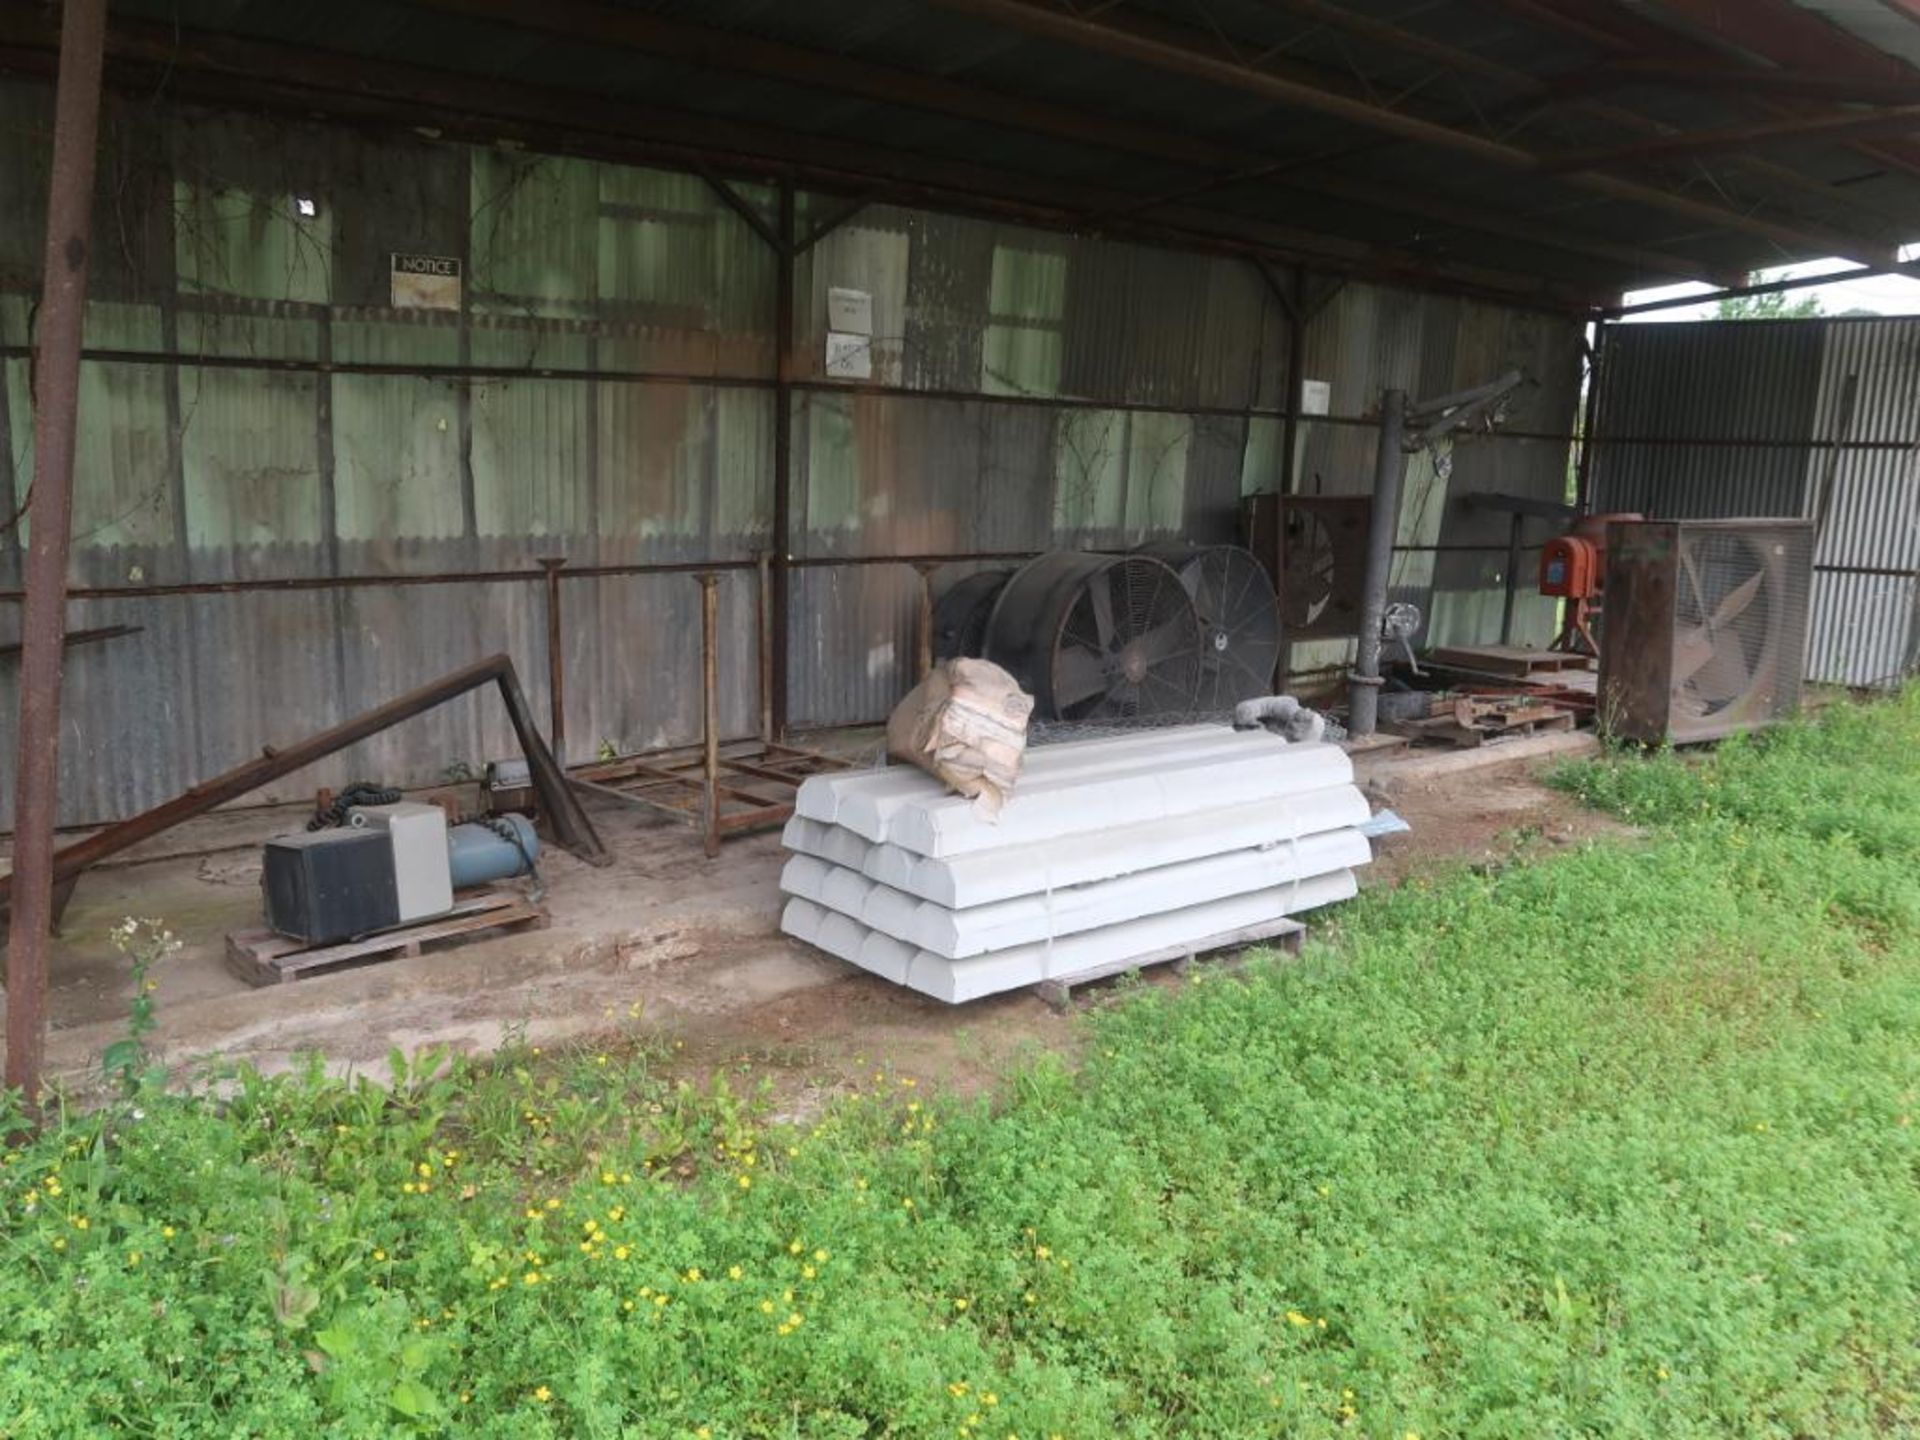 LOT: (1) Section Pallet Rack with Contents, Contents of Outdoor Storage Area, Tank, Cement Mixer,